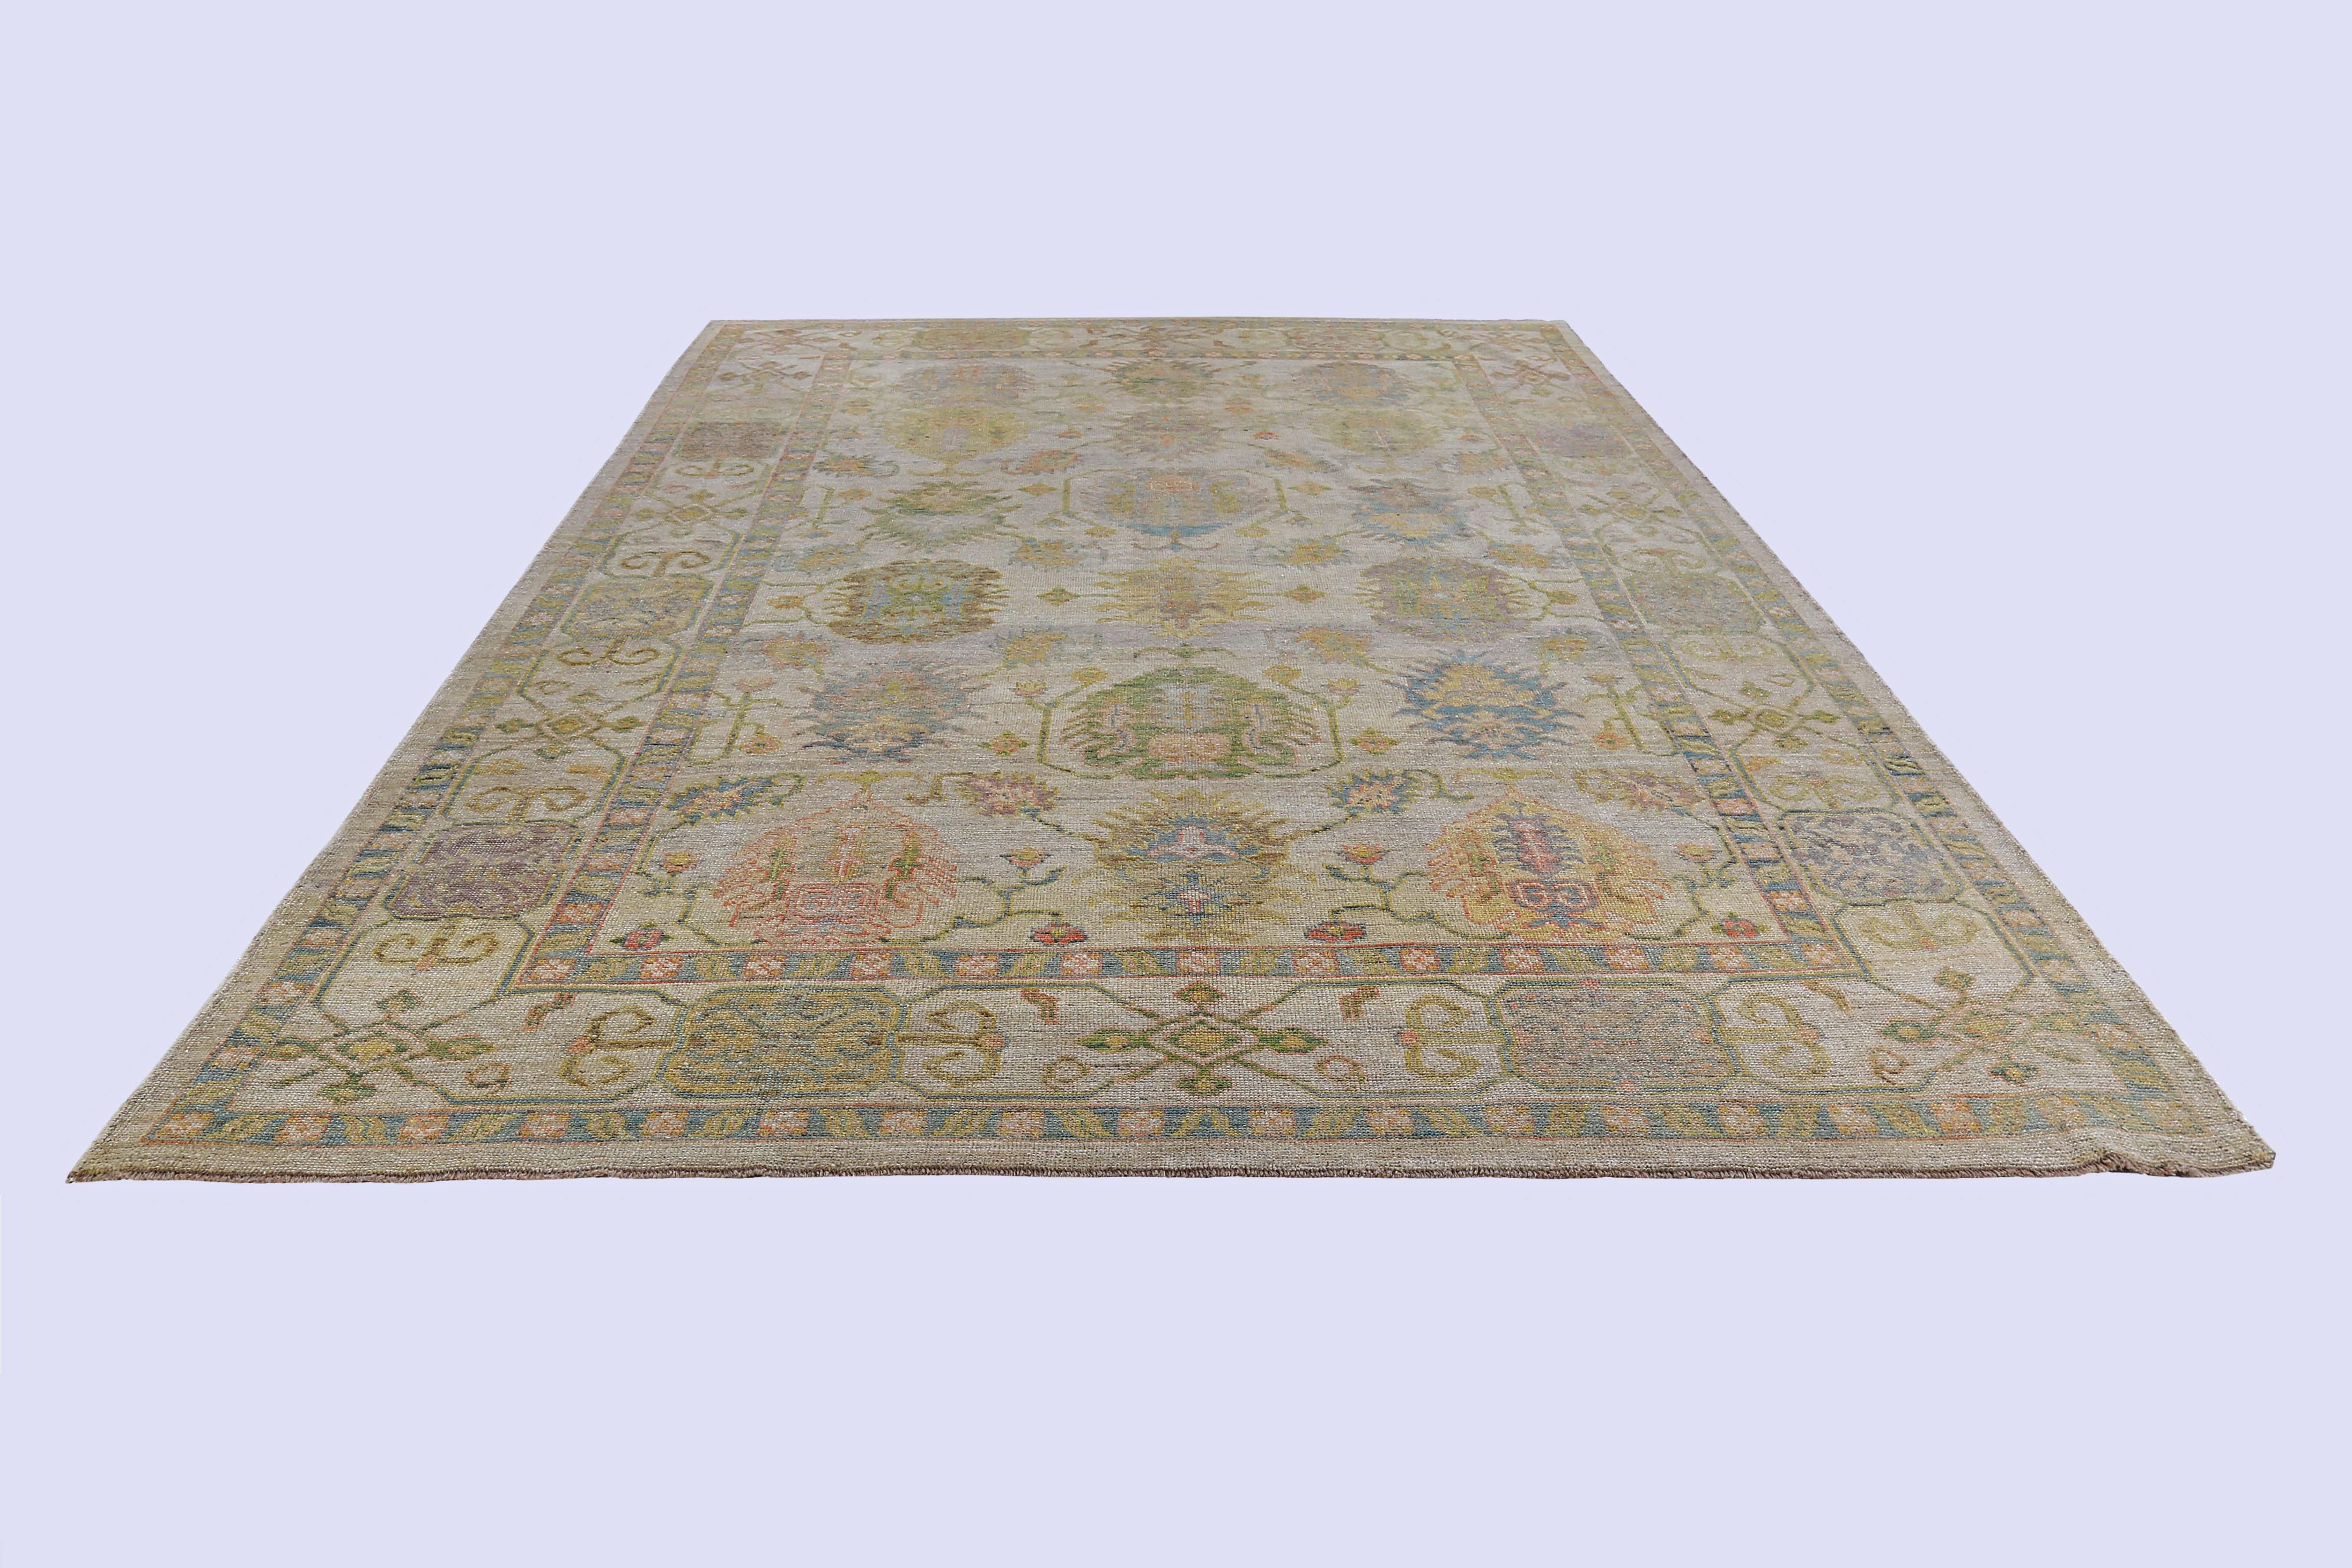 Turkish rug made of handwoven sheep’s wool of the finest quality. It’s colored with organic vegetable dyes that are certified safe for humans and pets alike. It features blue orange and green flower heads on a beautiful beige field. Flower patterns